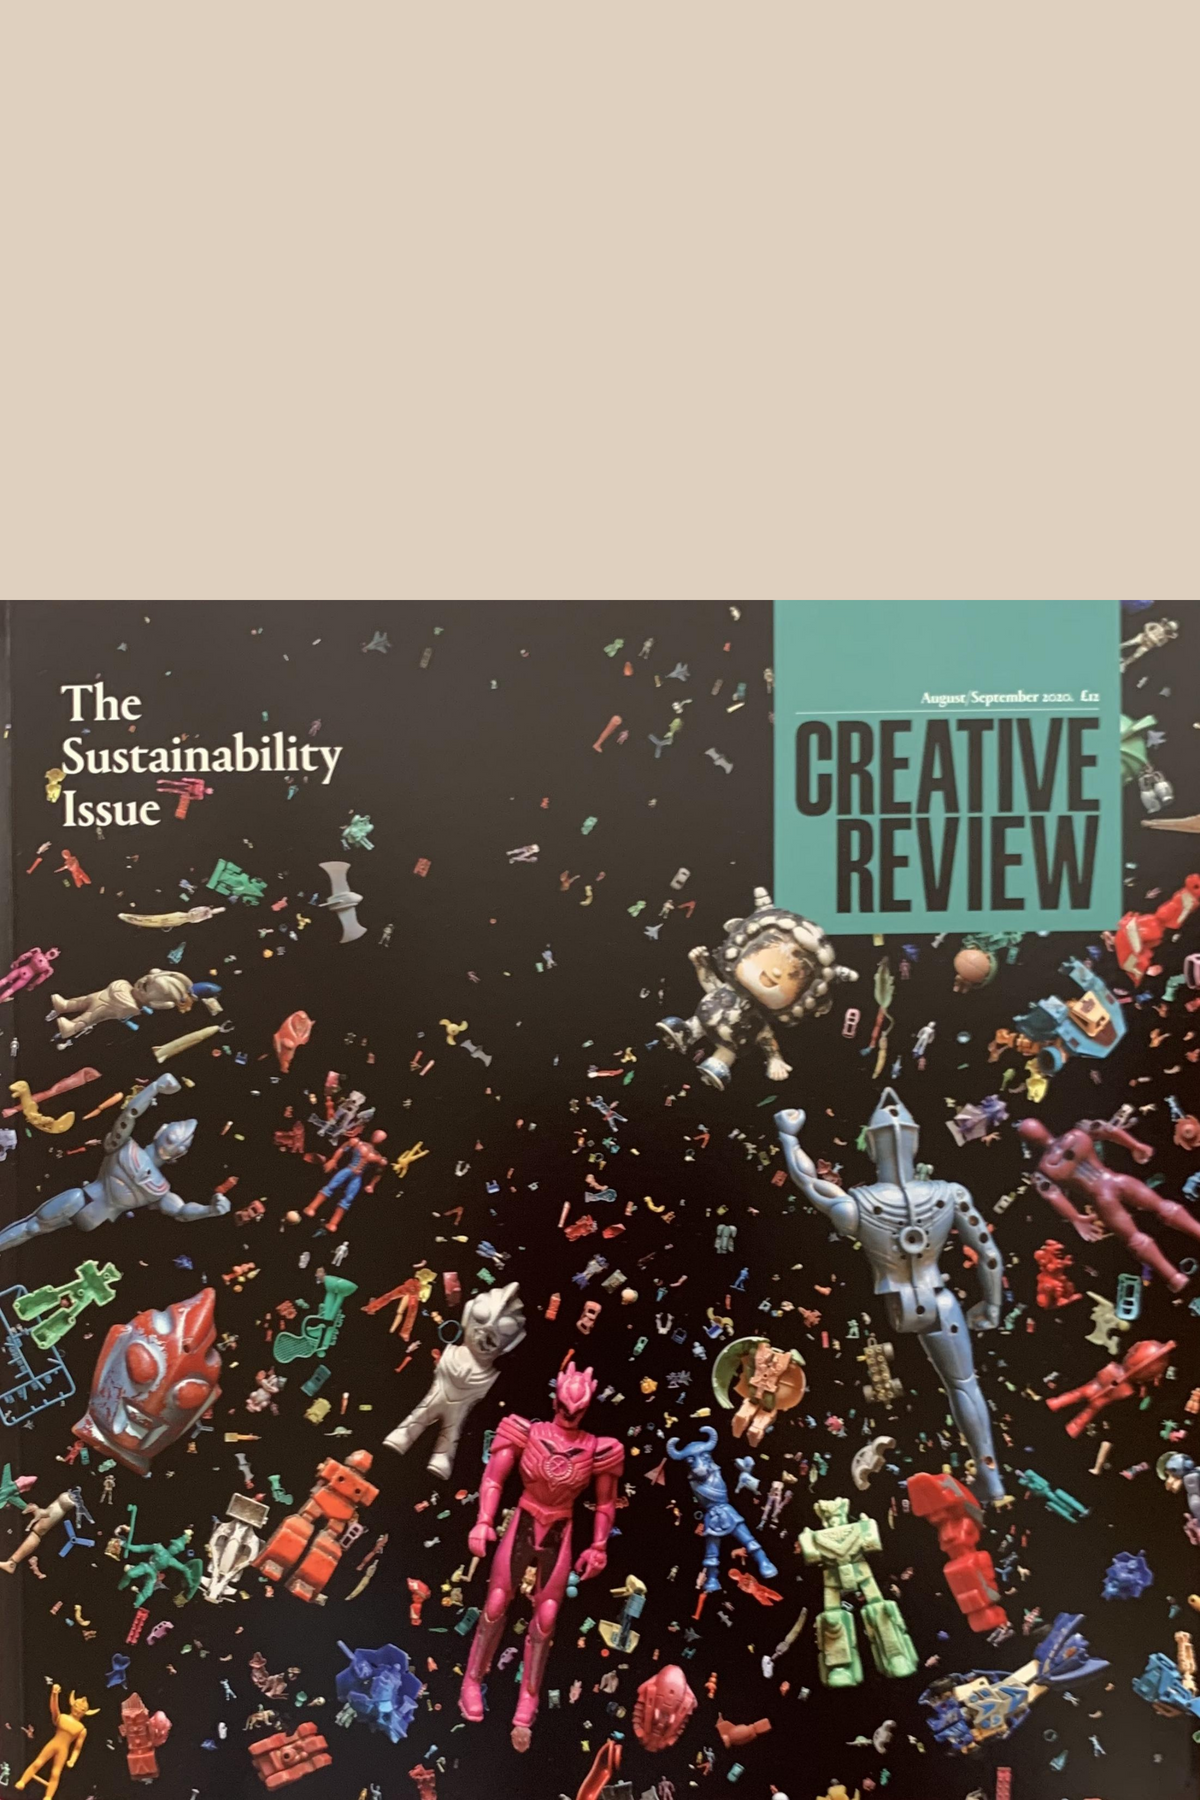 Creative Review Issue 4 Aug-Sep 2020